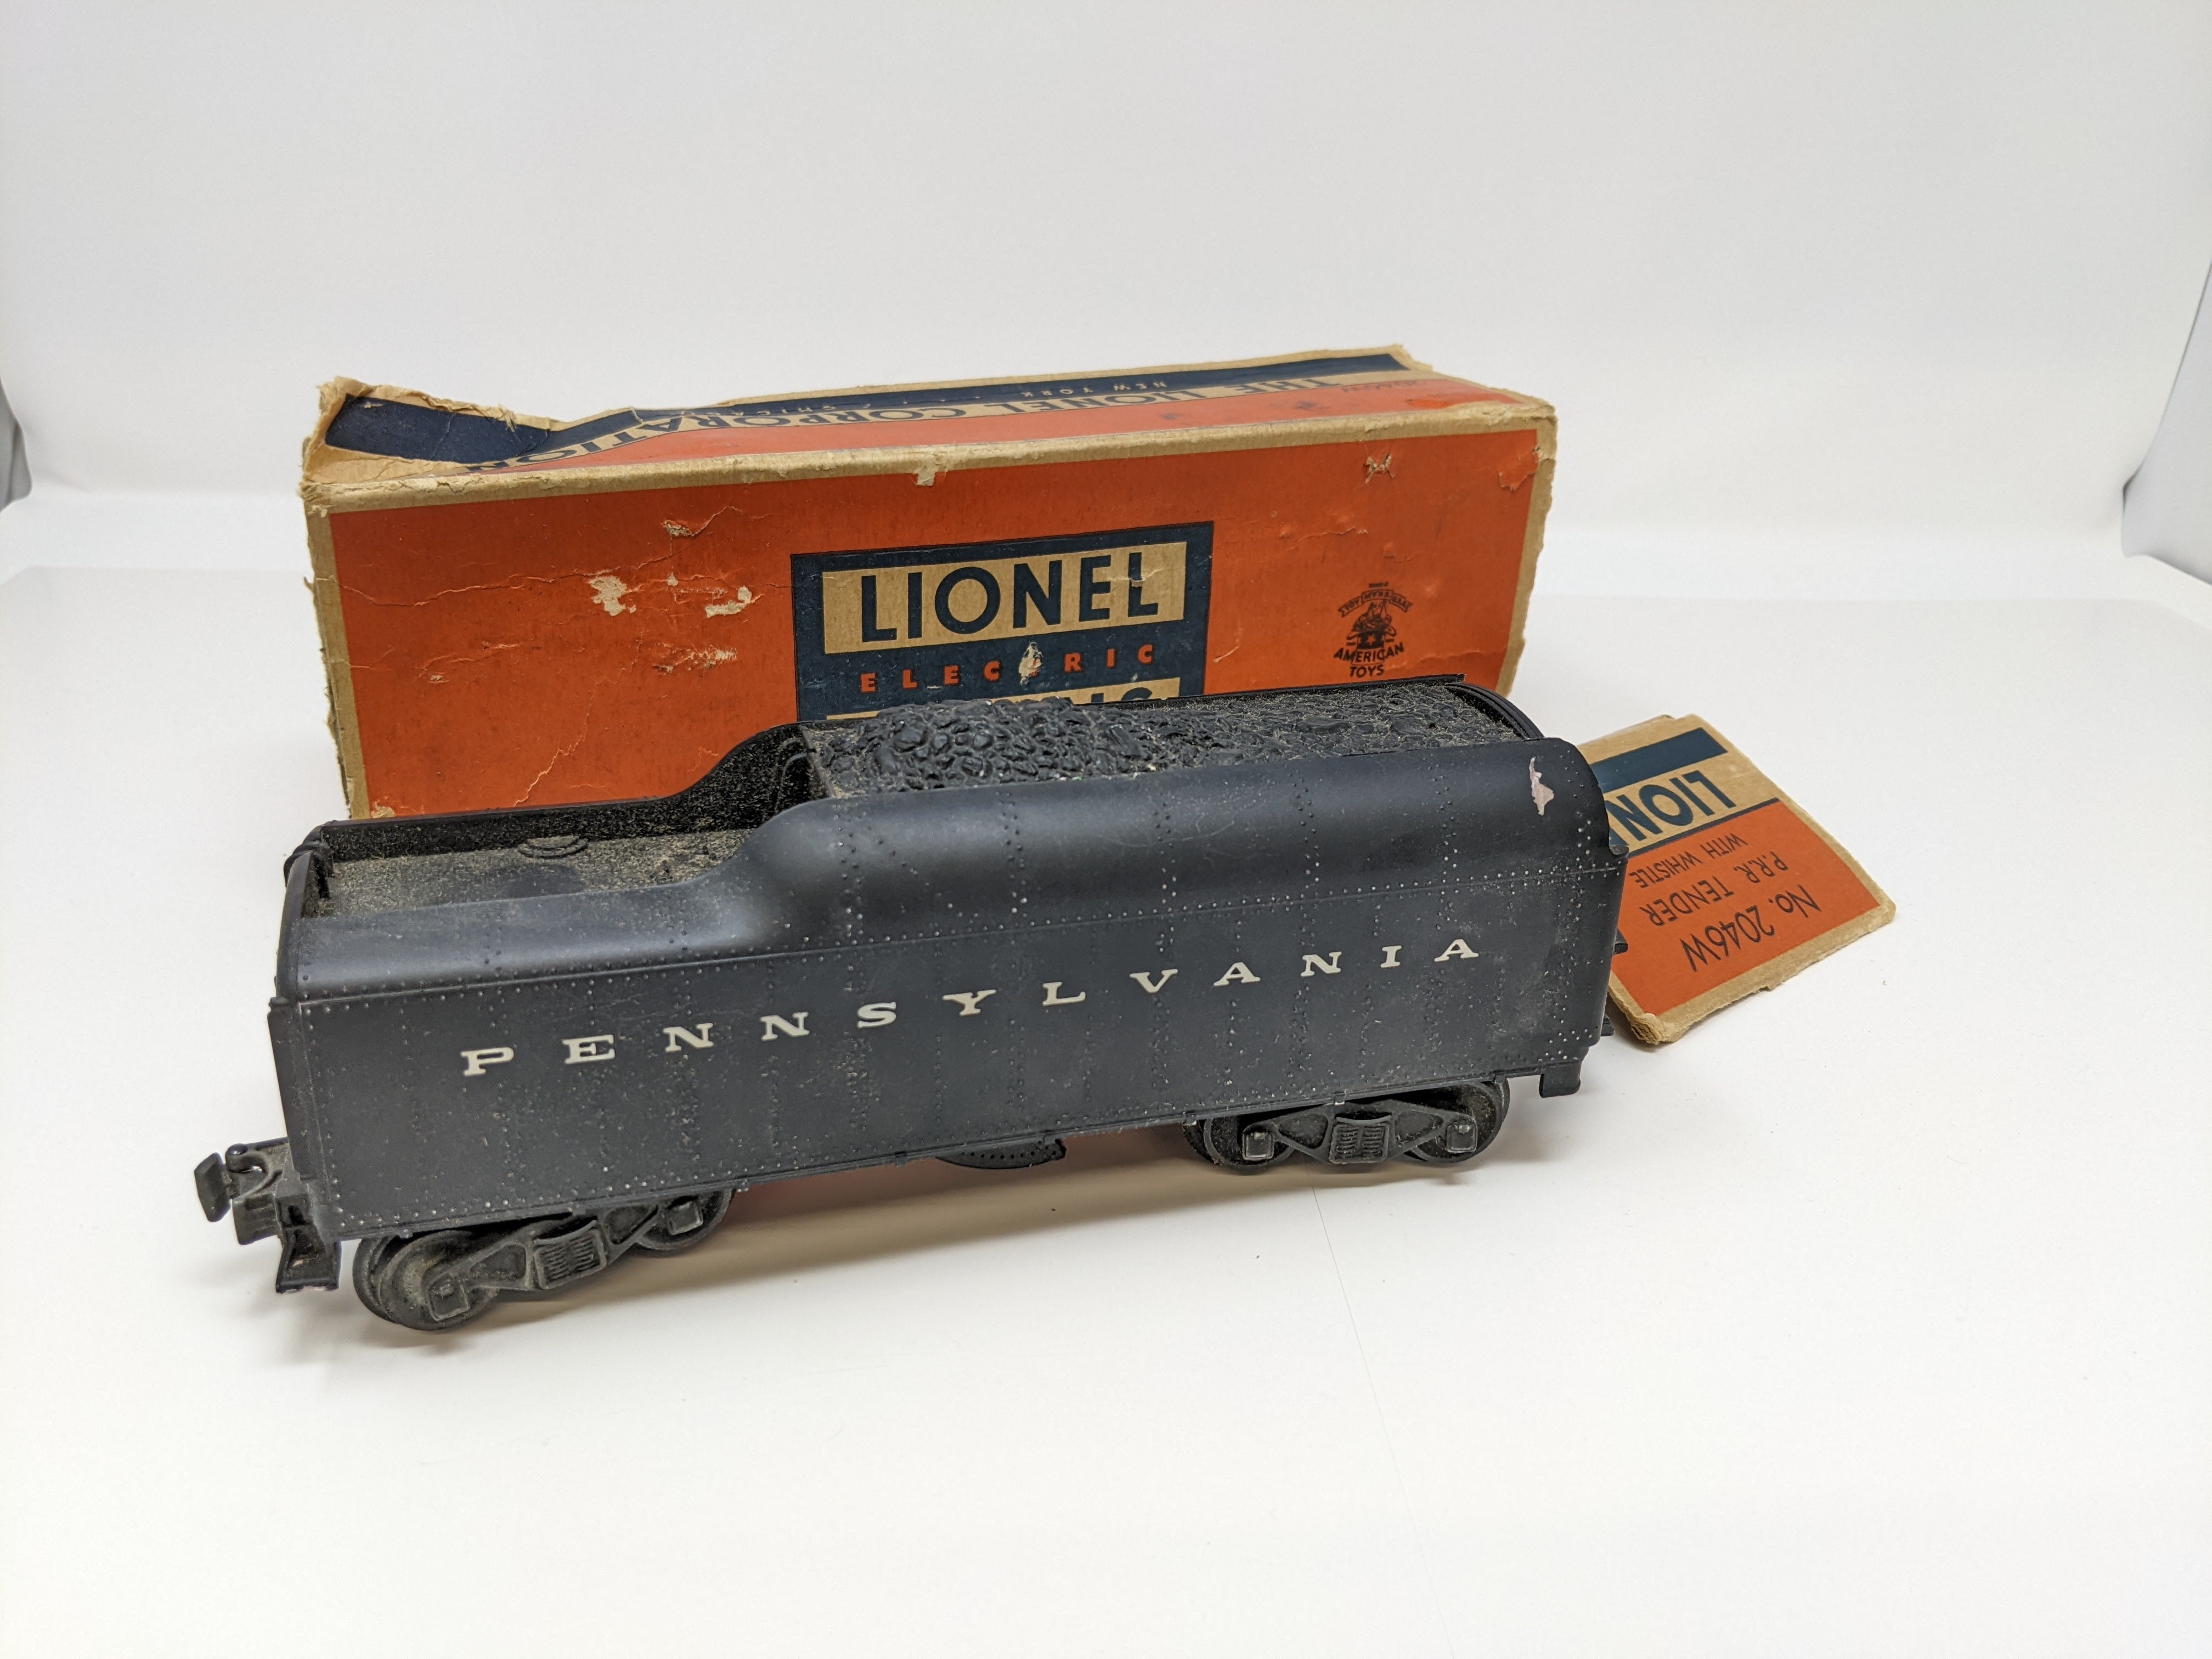 USED Lionel 2046W O, Tender with Whistle, Pennsylvania , Box, Needs Work